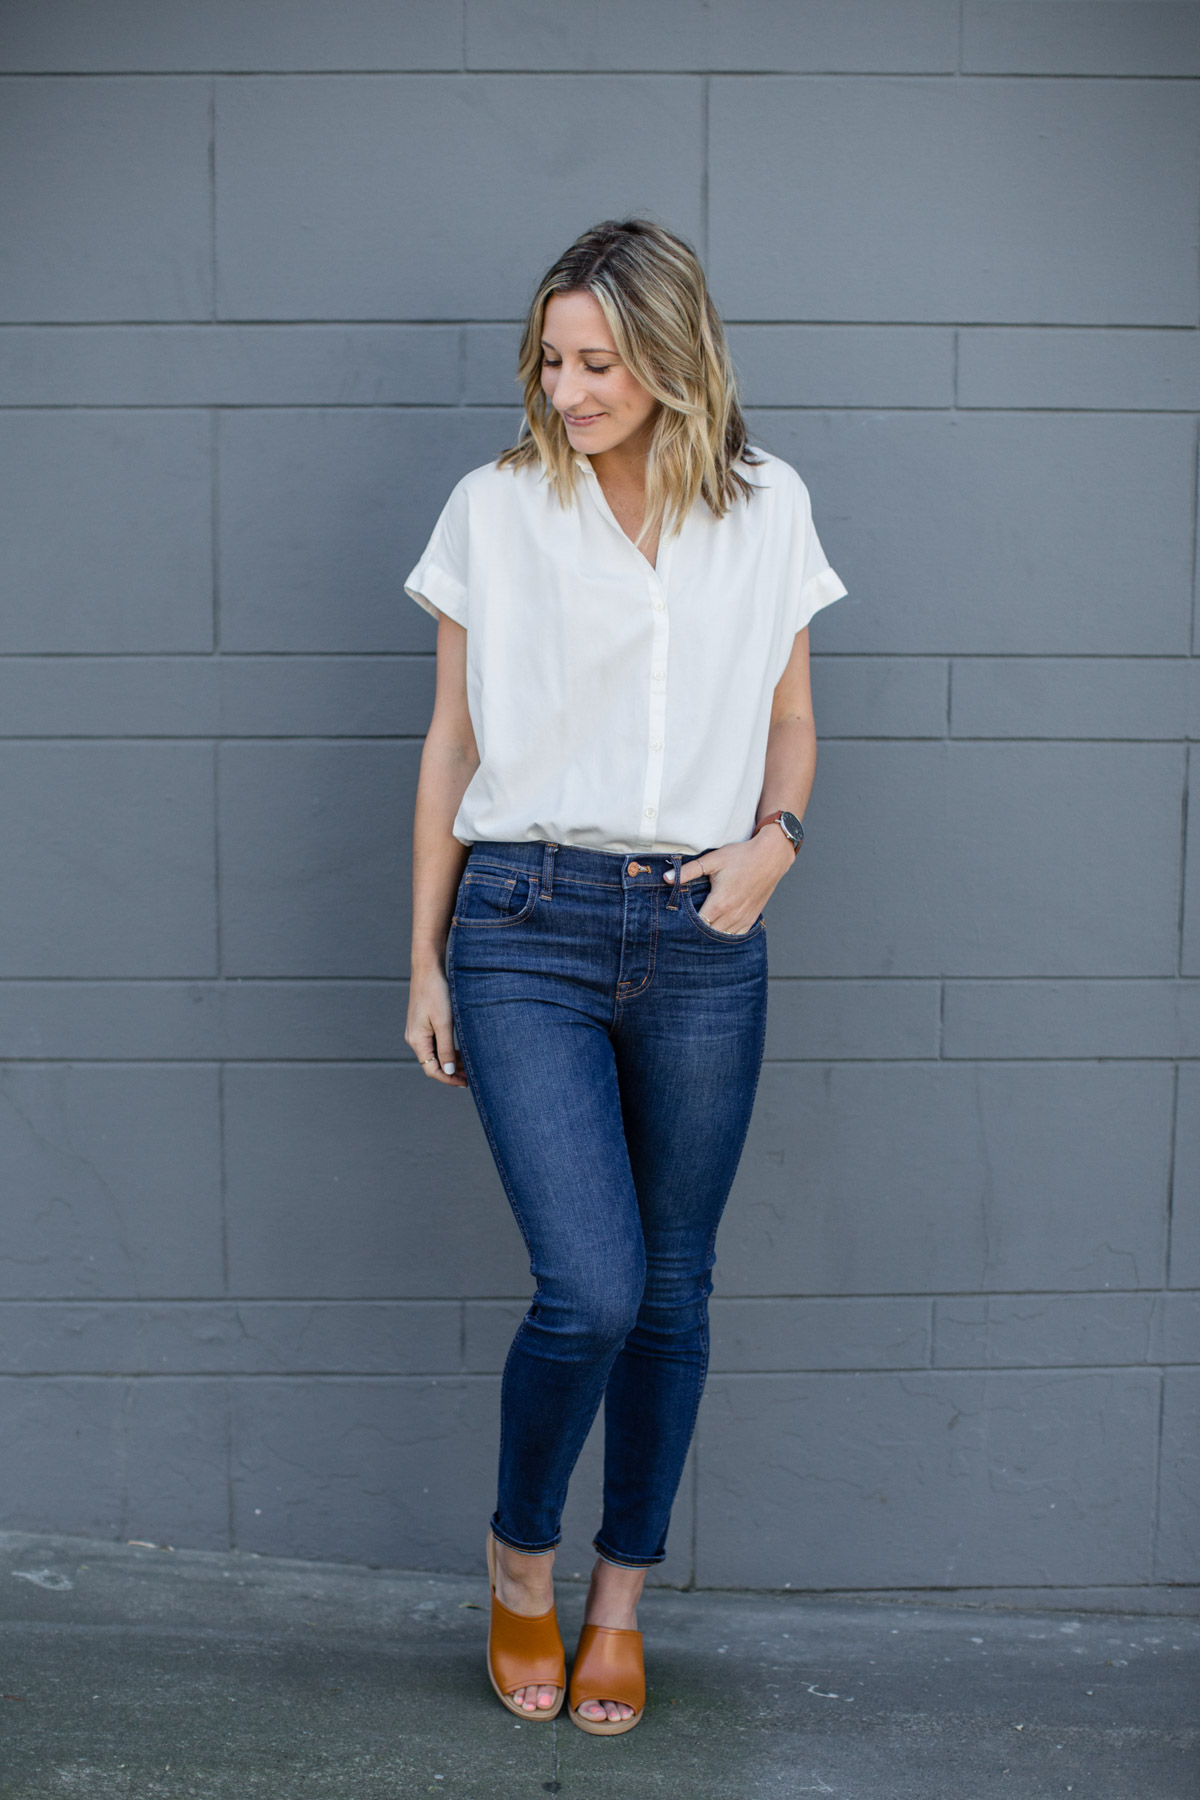 basic outfits with skinny jeans and white button-down shirt